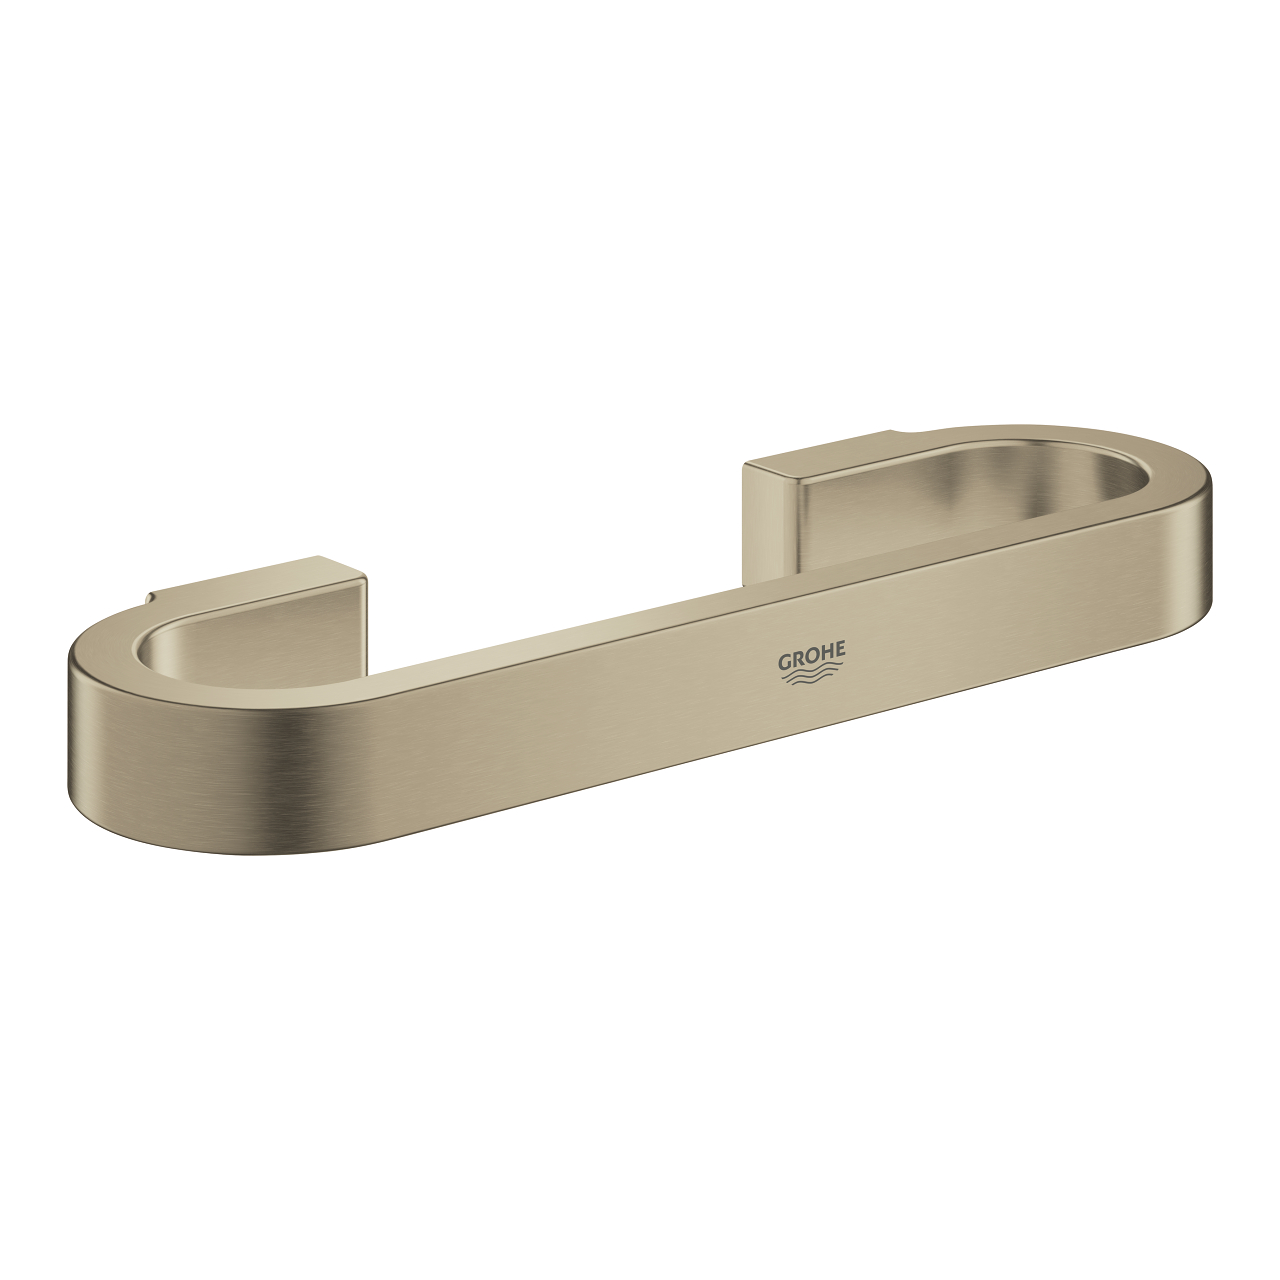 Uchwyt wannowy Grohe Selection brushed nickel 41064EN0